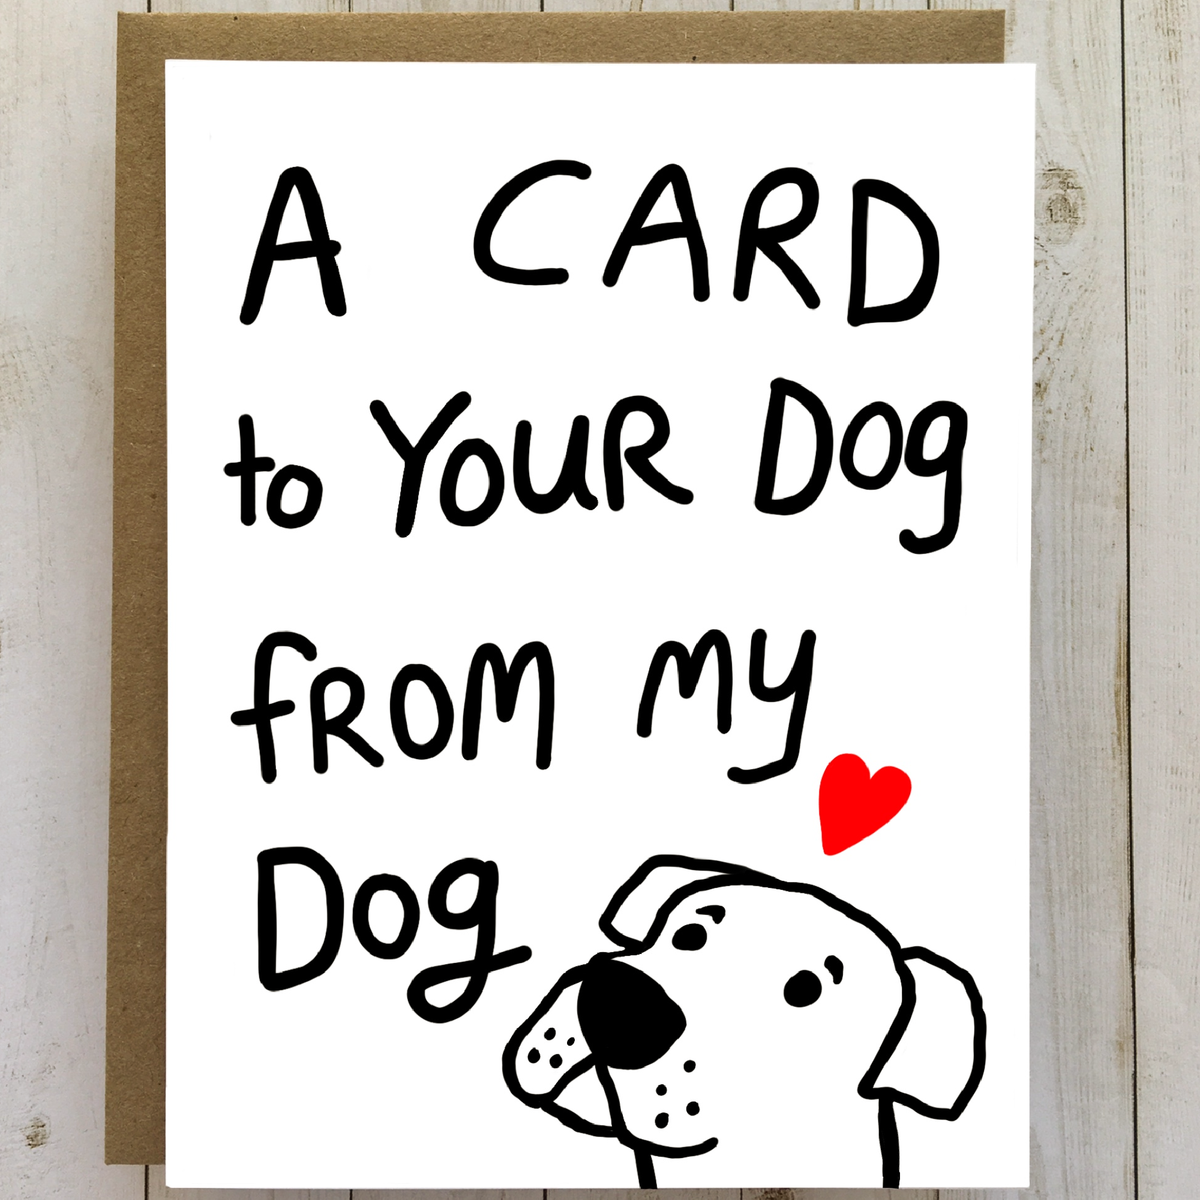 Card To Your Dog From My Dog